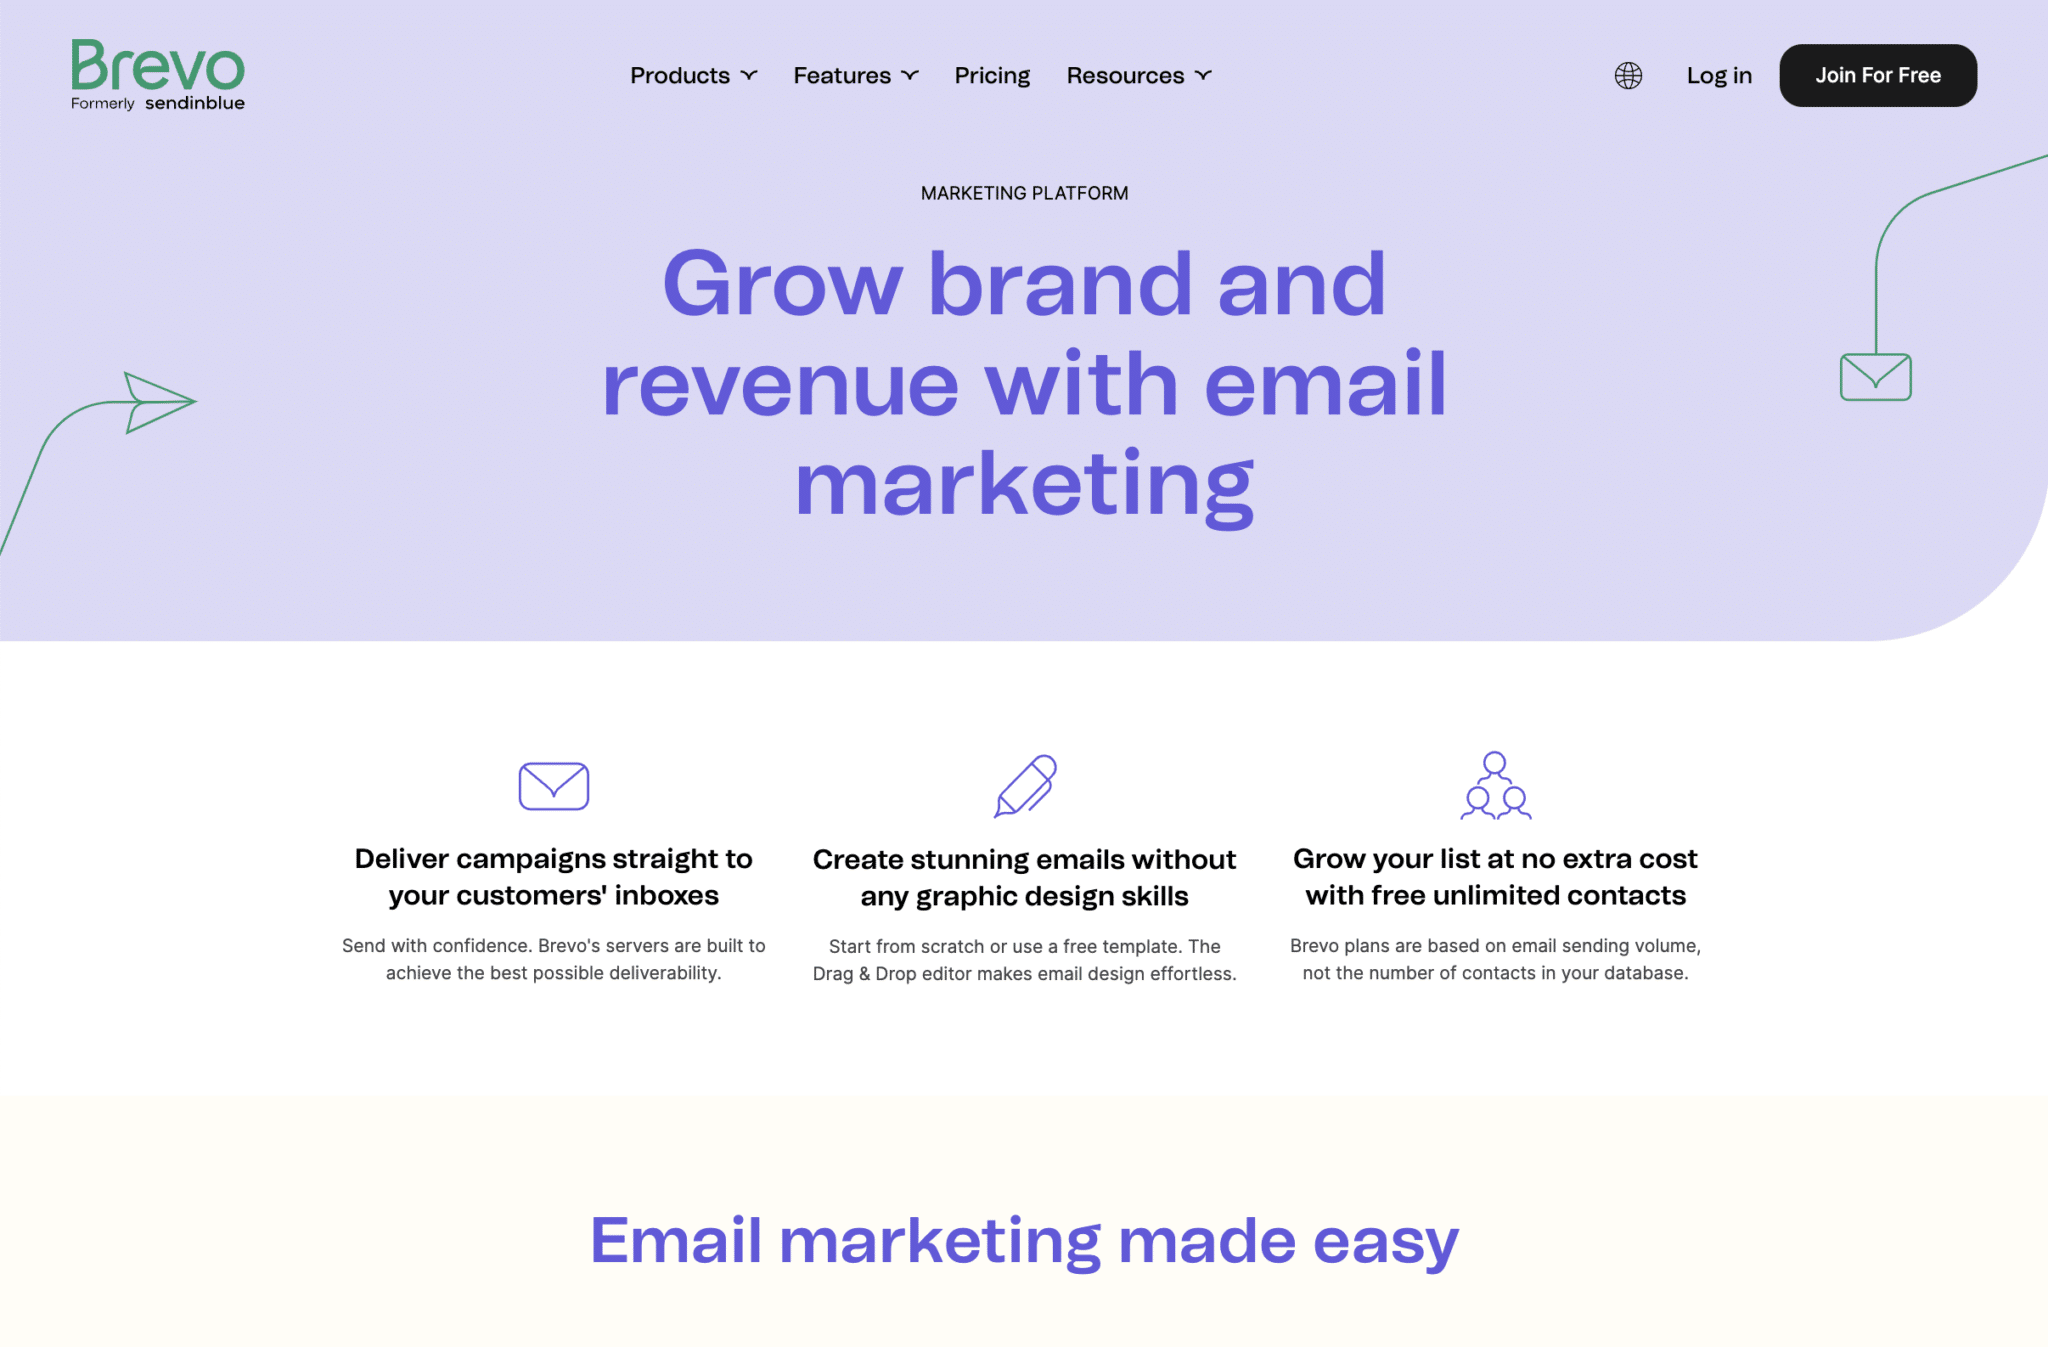 Email marketing with Brevo